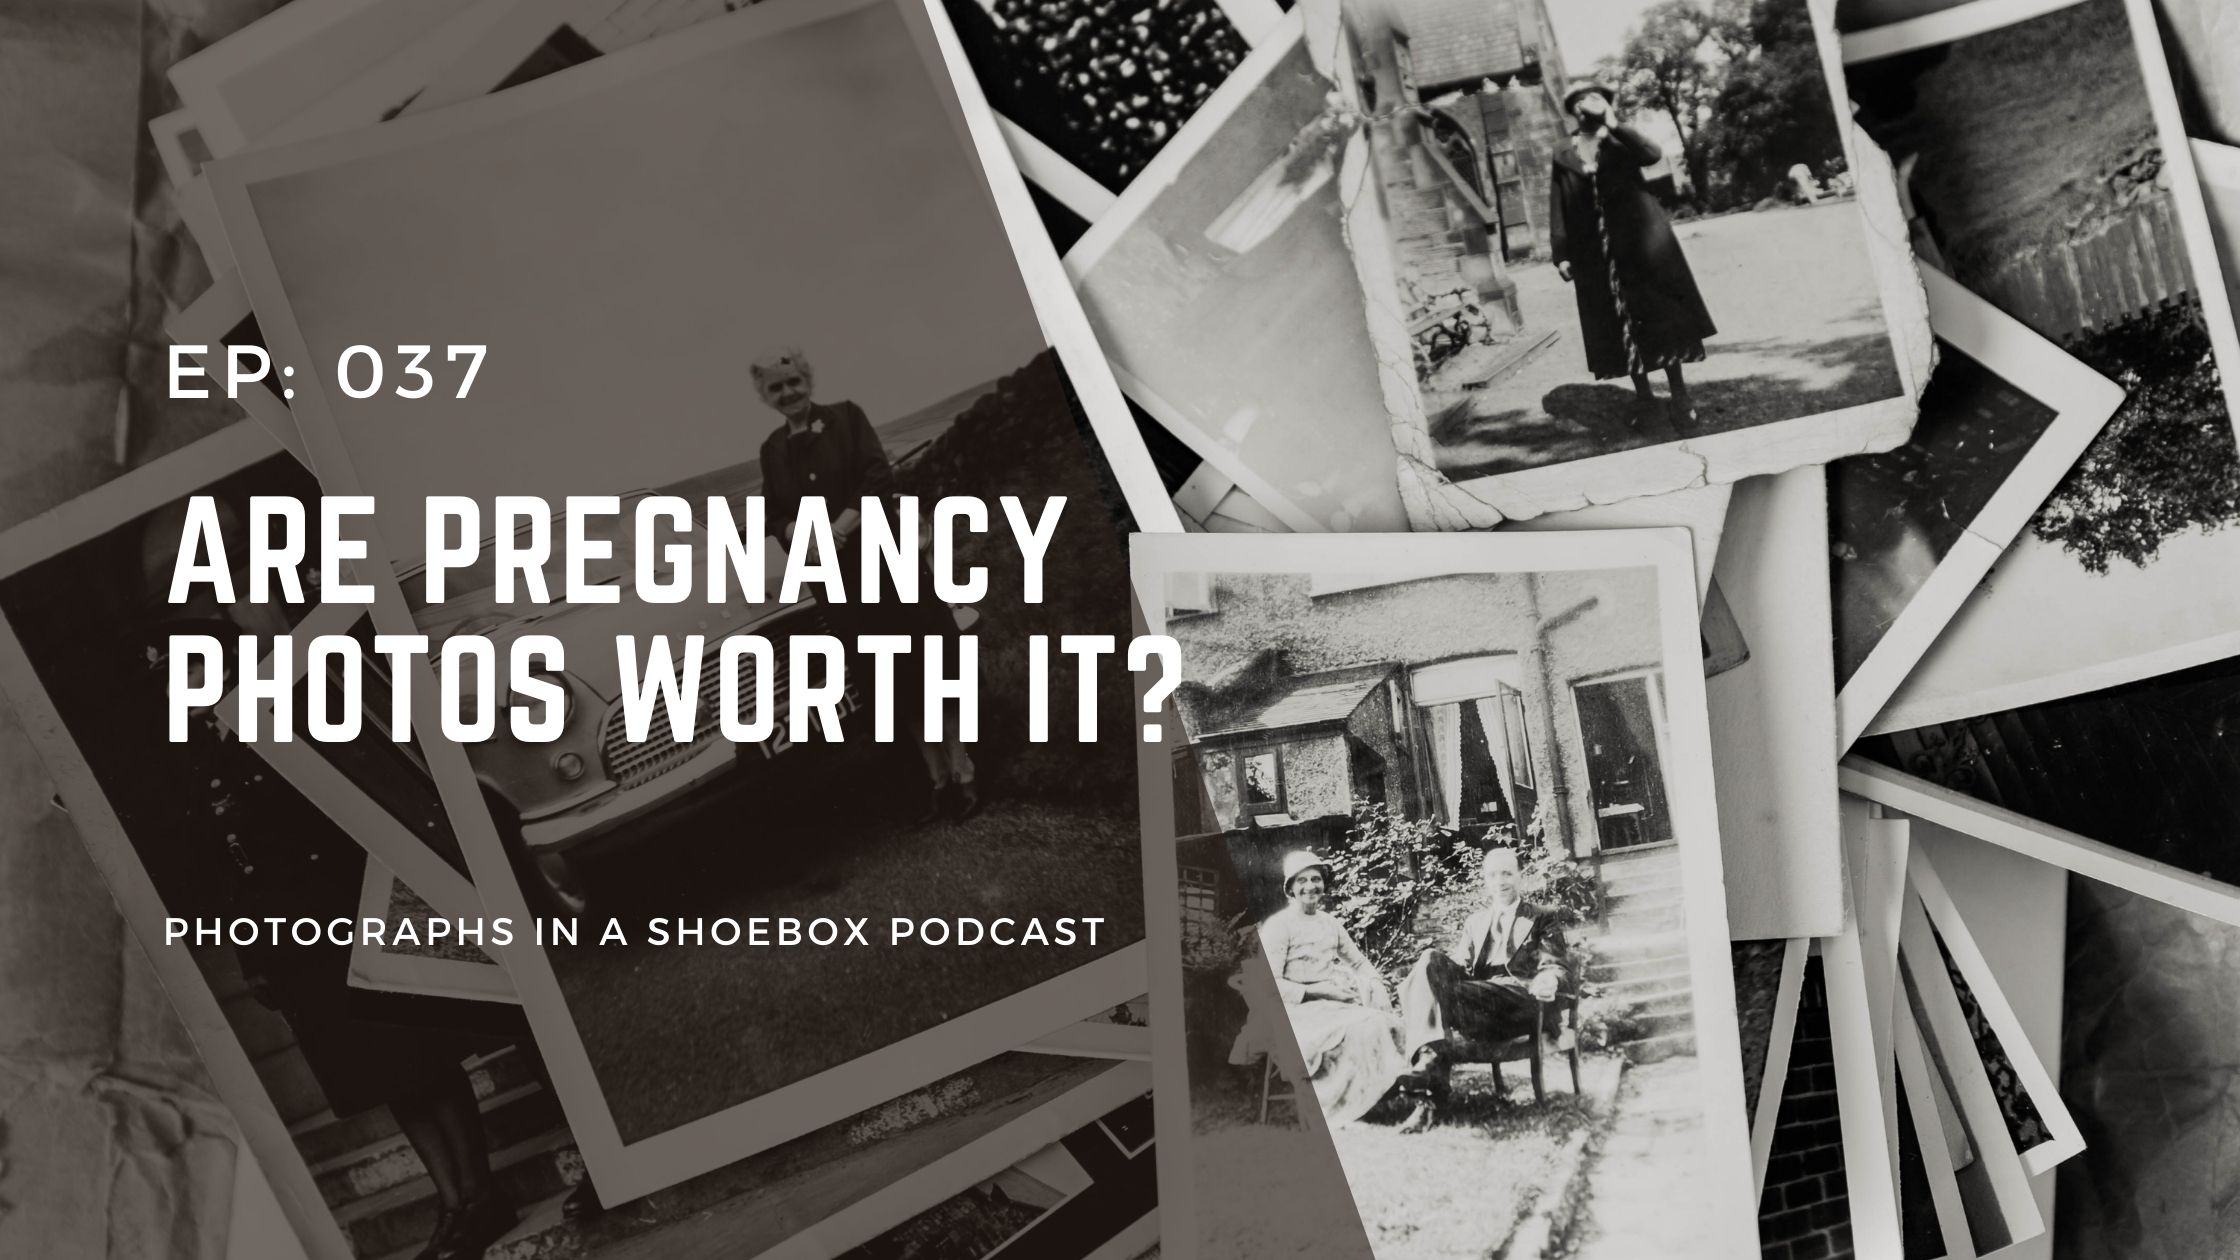 artwork for podcast episode debating if a pregnancy photoshoot is worth it?